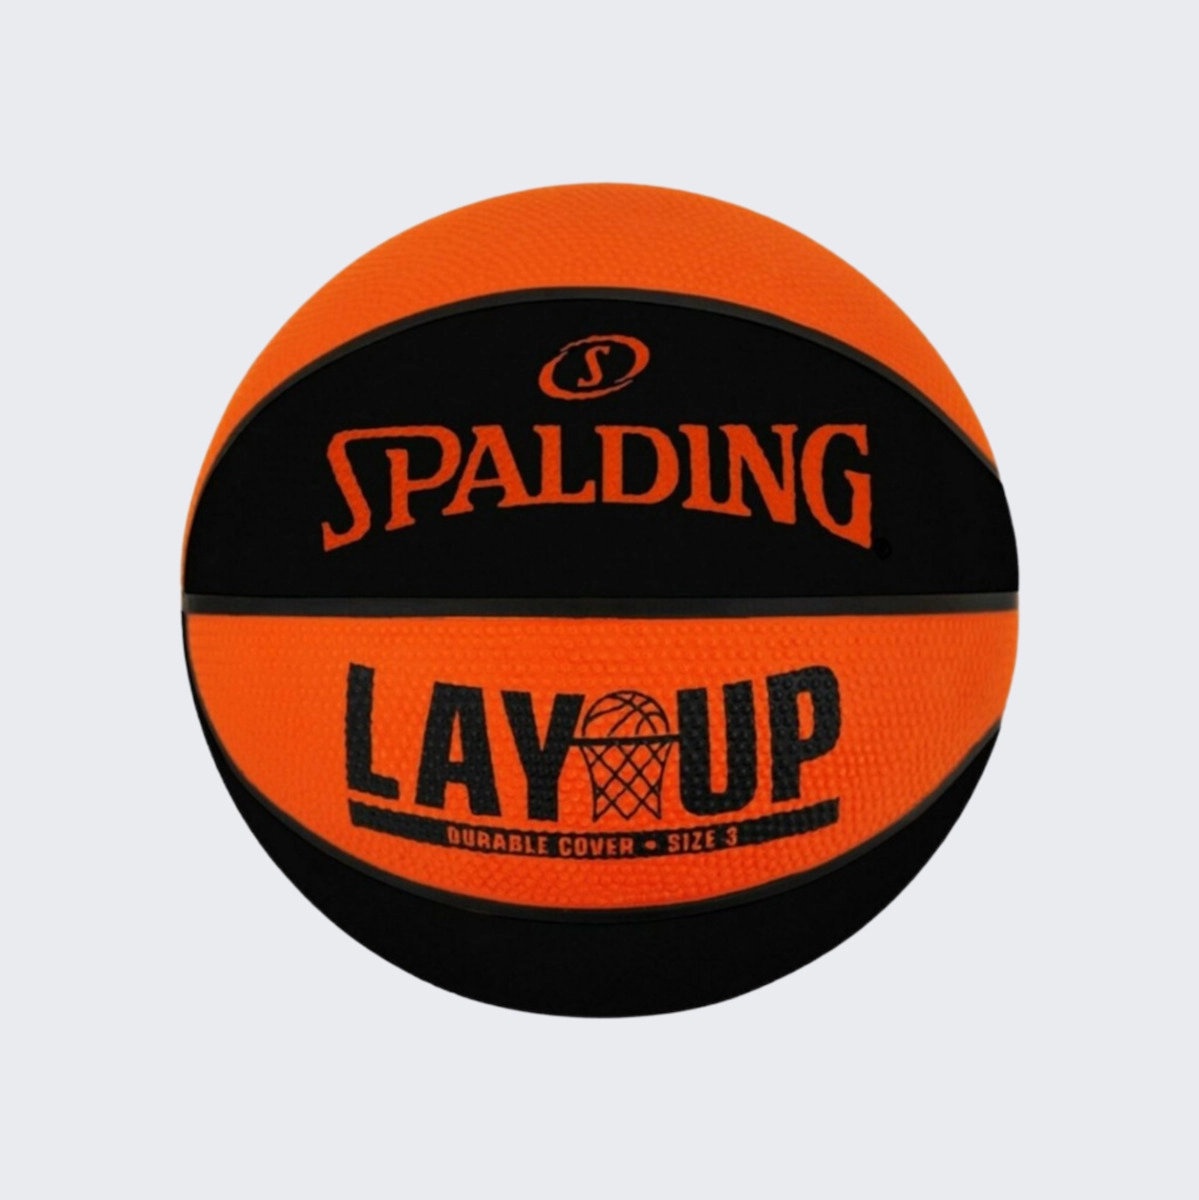 Spalding lay up size 3/5/7